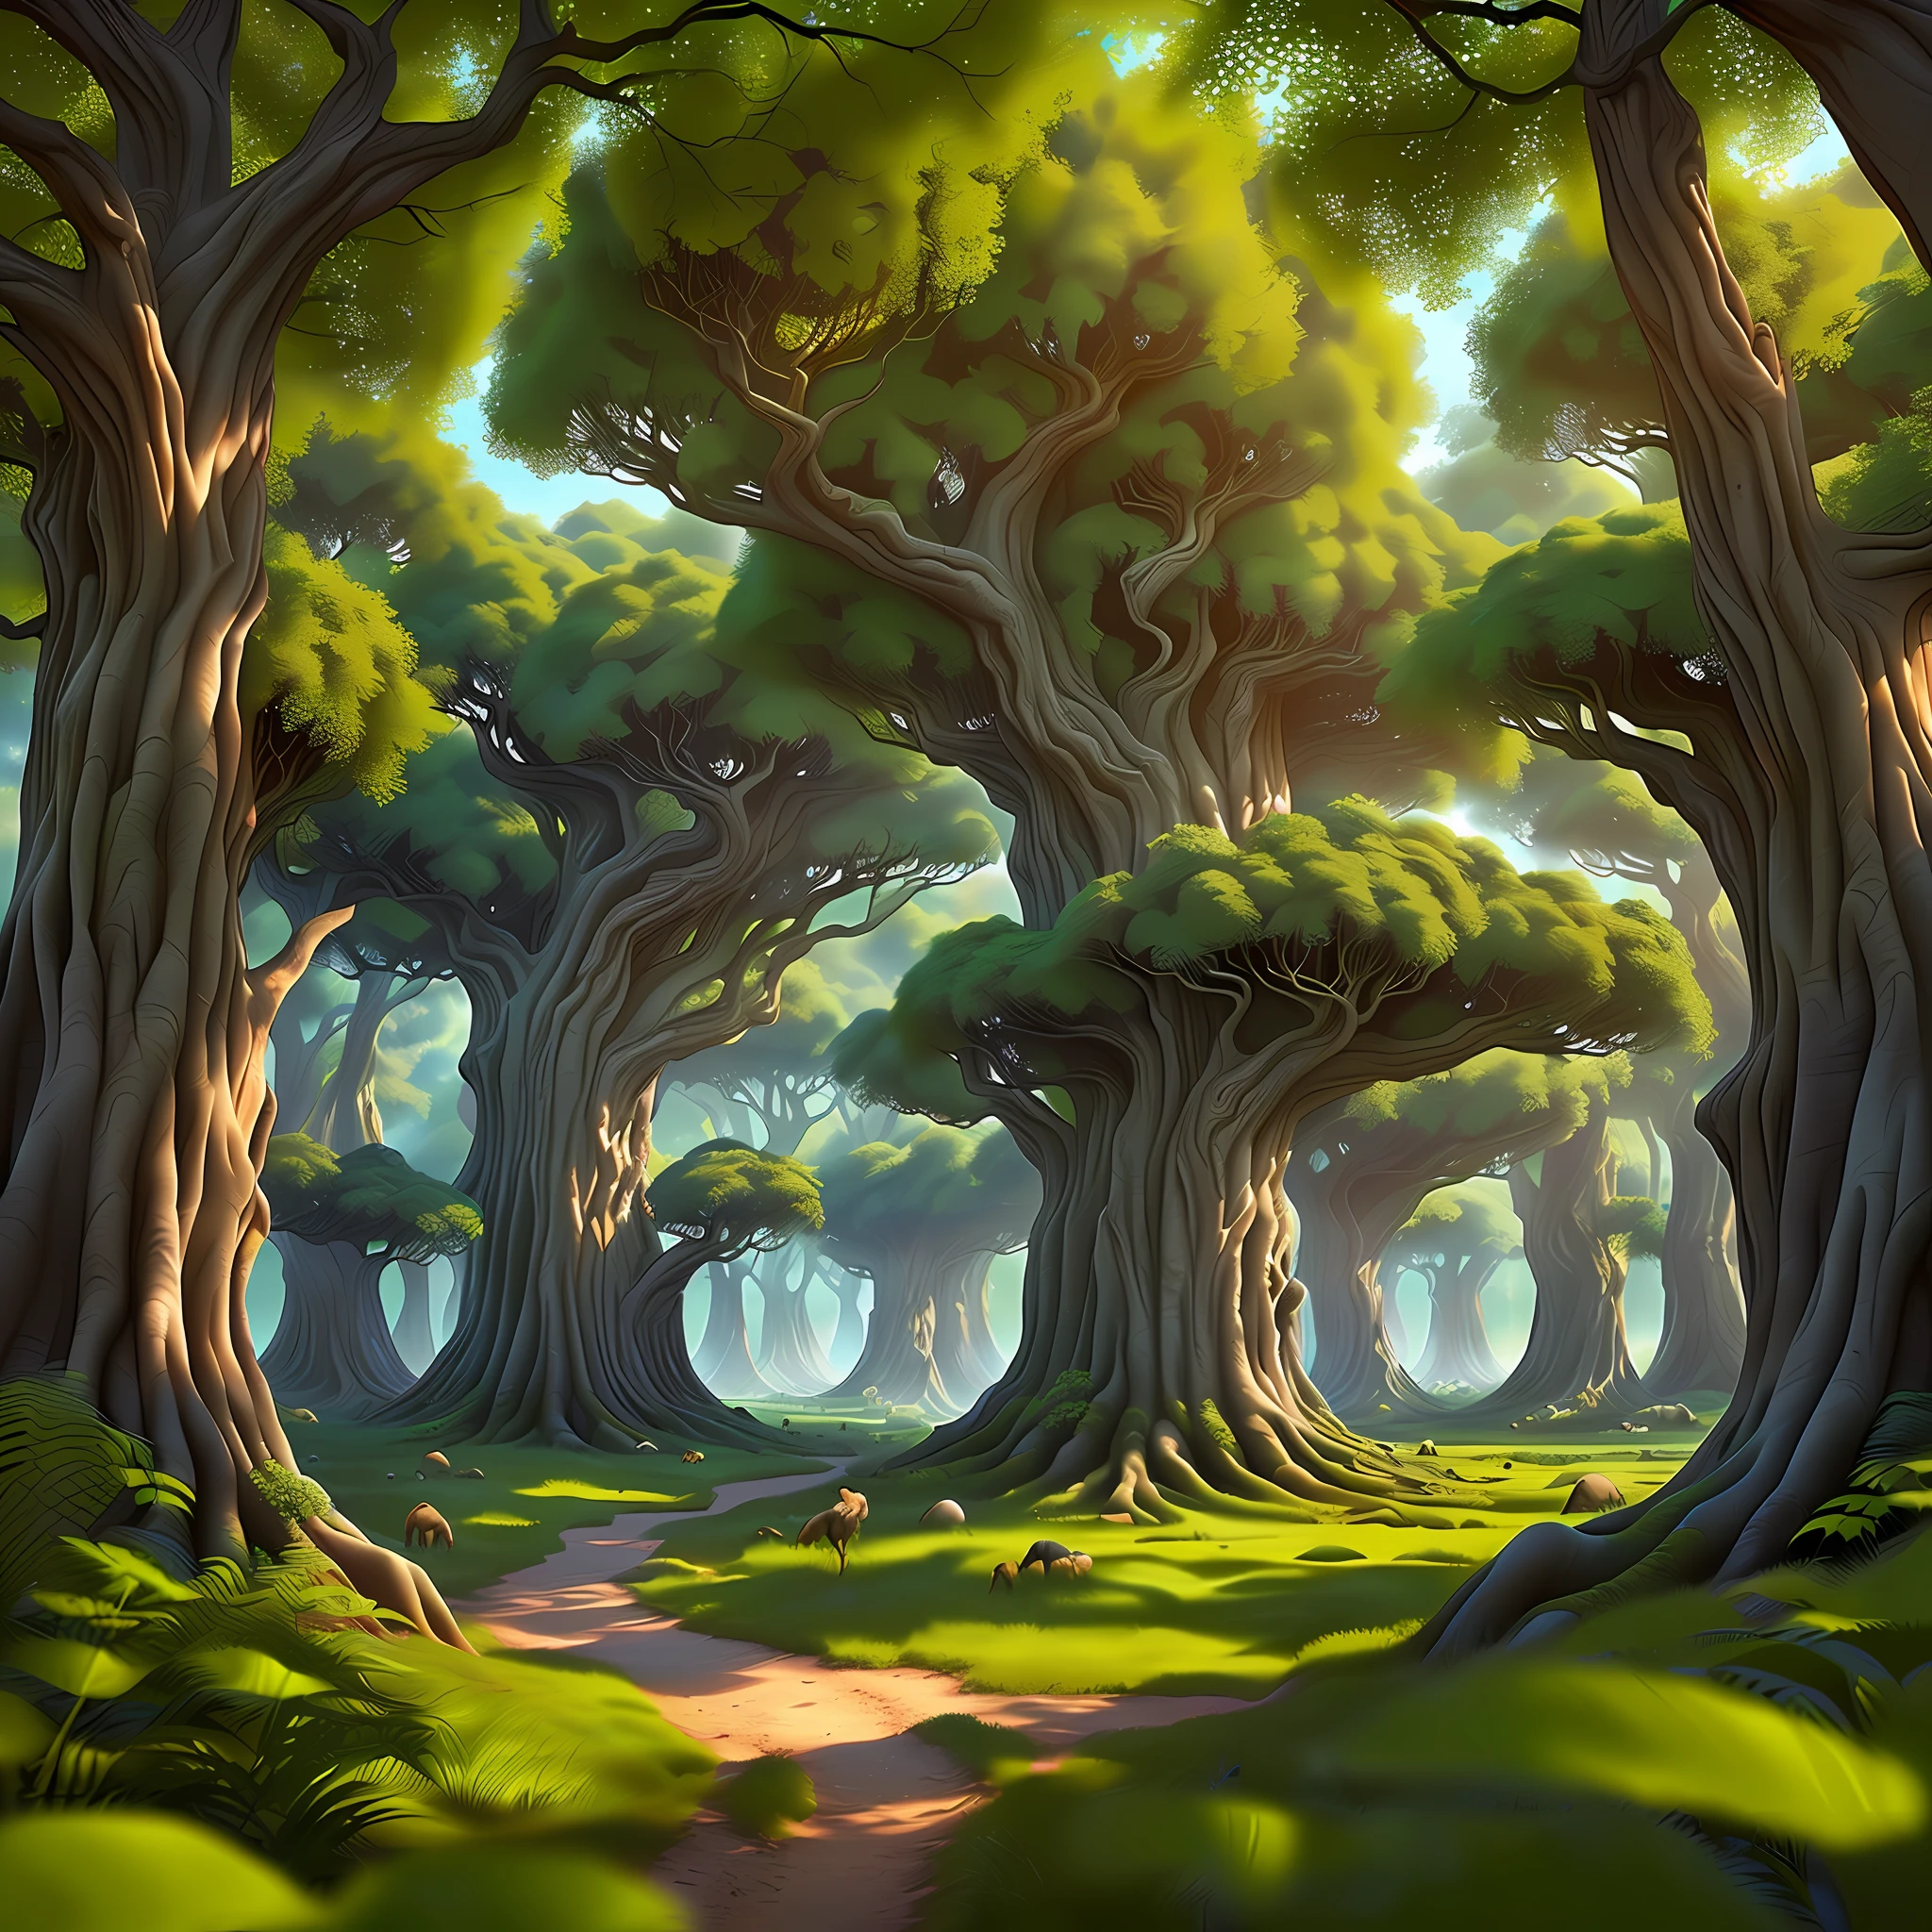 Design an abstract and fantastical psychedelic landscape set in a dense and lush forest. Let the trees morph into vibrant and whimsical forms, and populate the scene with mythical creatures like glowing fairies, majestic unicorns, and mischievous woodland spirits, highly detailed, master piece, 8k resolution